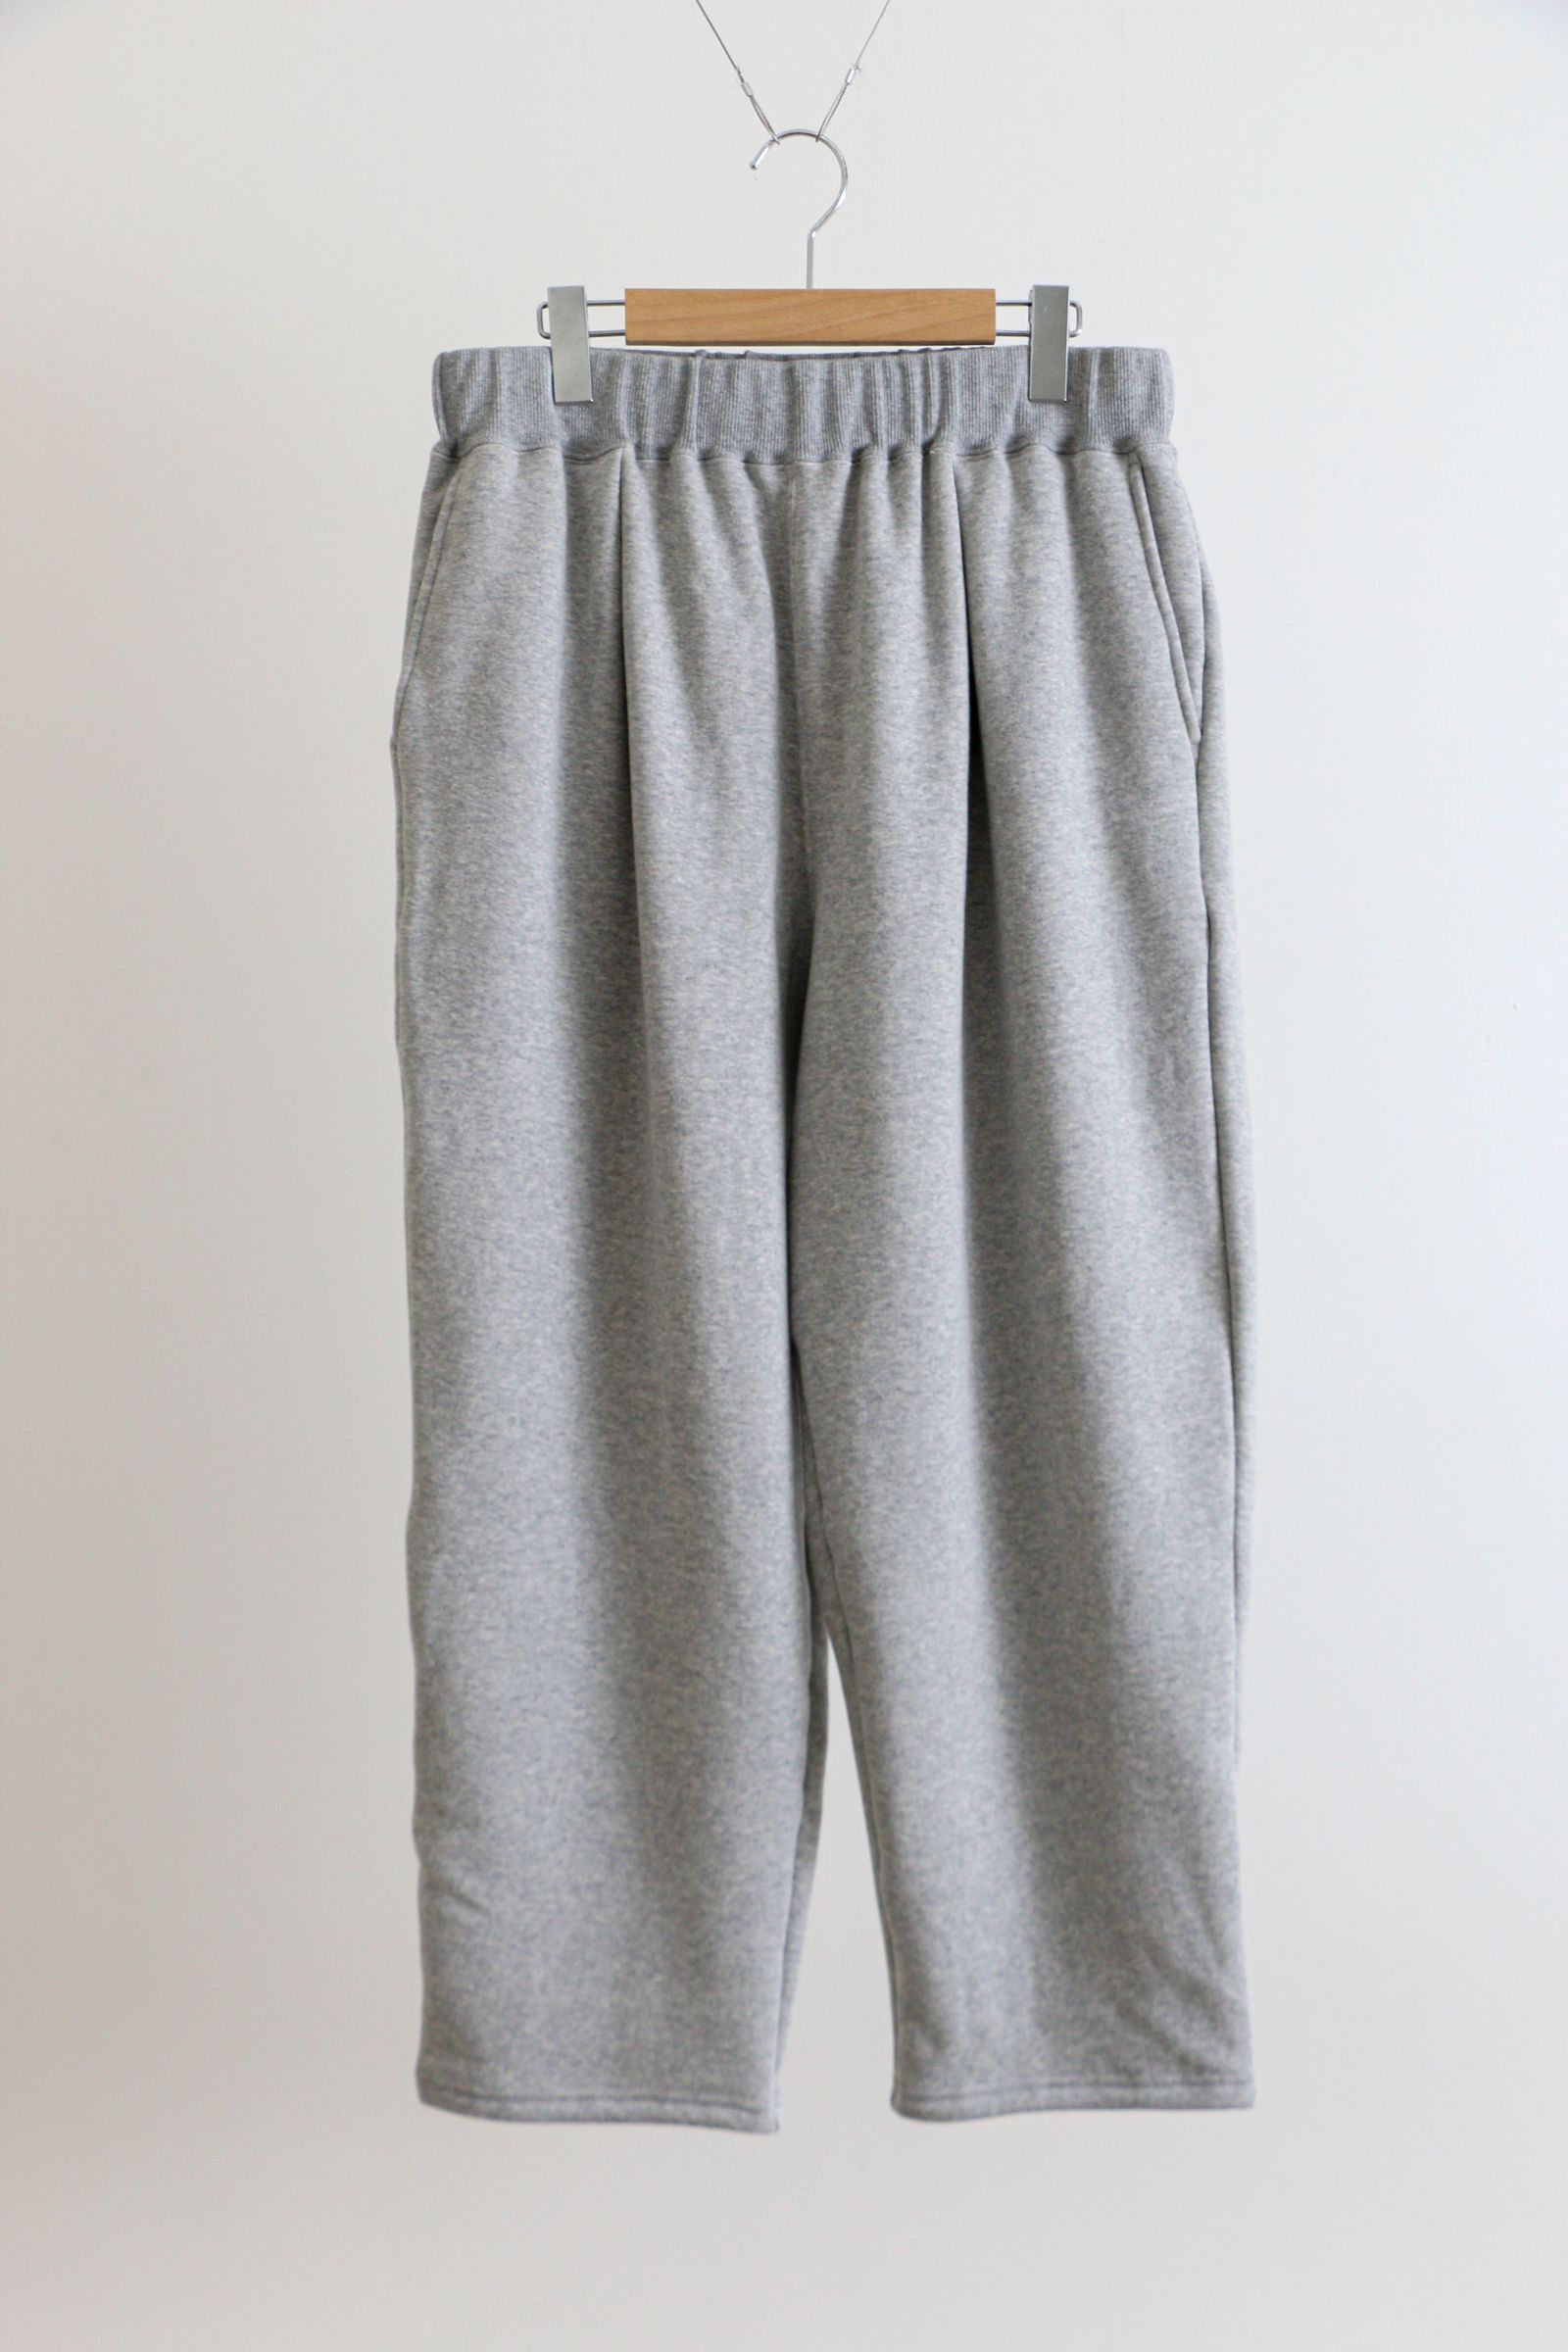 is-ness - RELAX WIDE SWEAT PANT GRAY / グレー / リラックスワイド